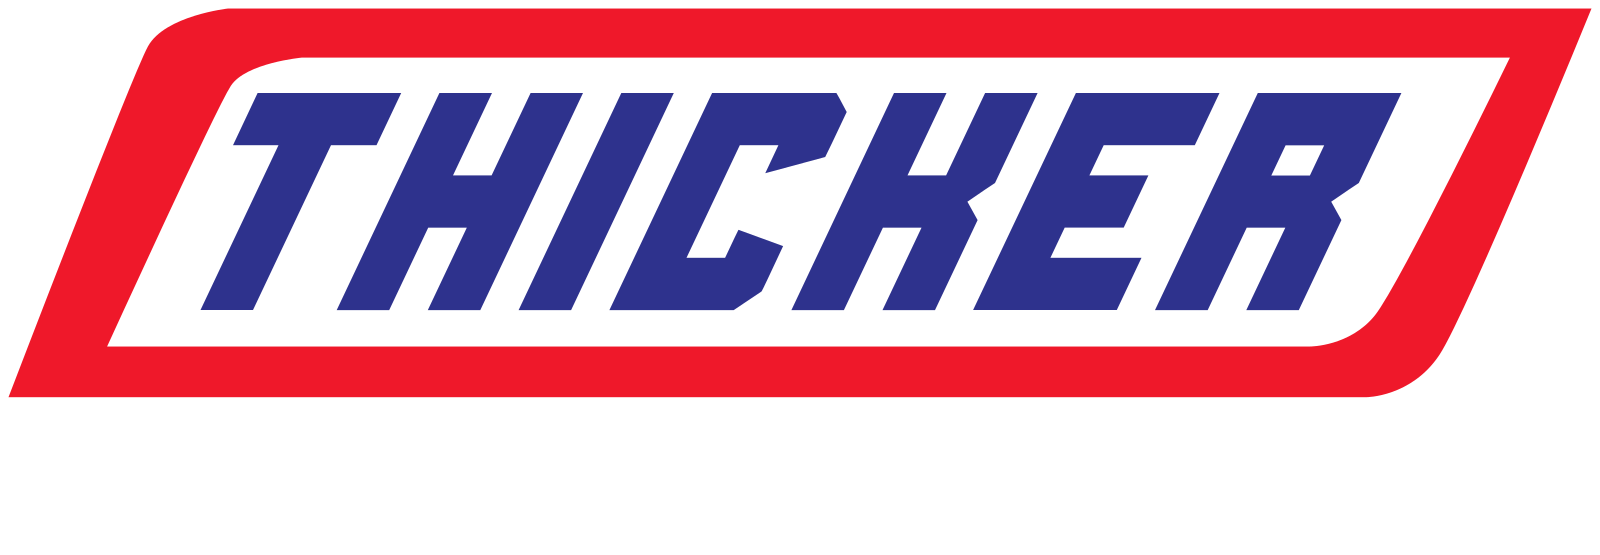 A thicker snicker than You Are